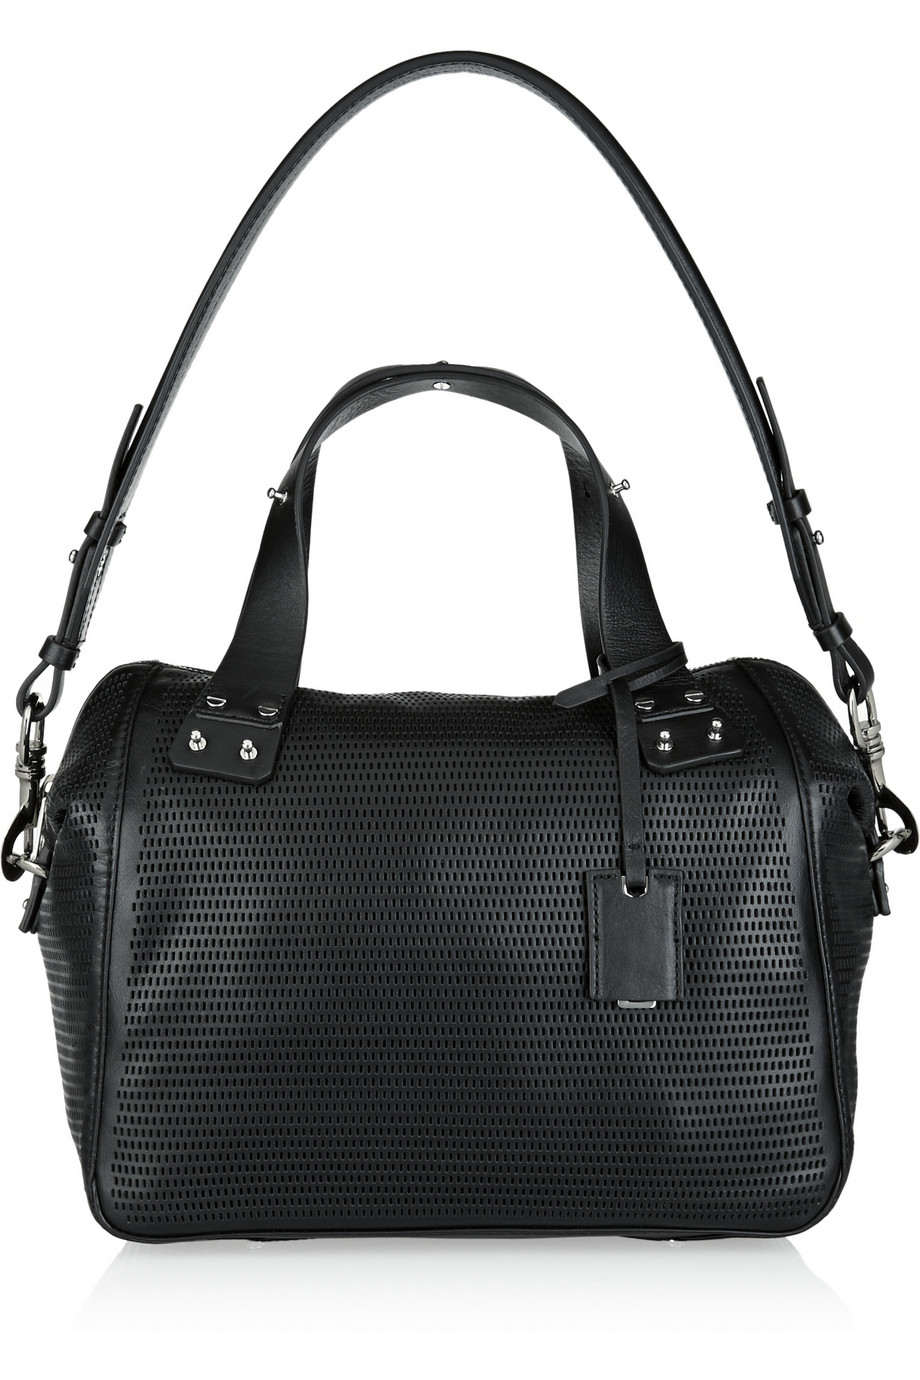 Mcq Redchurch Perforated Leather Shoulder Bag in Black | Lyst